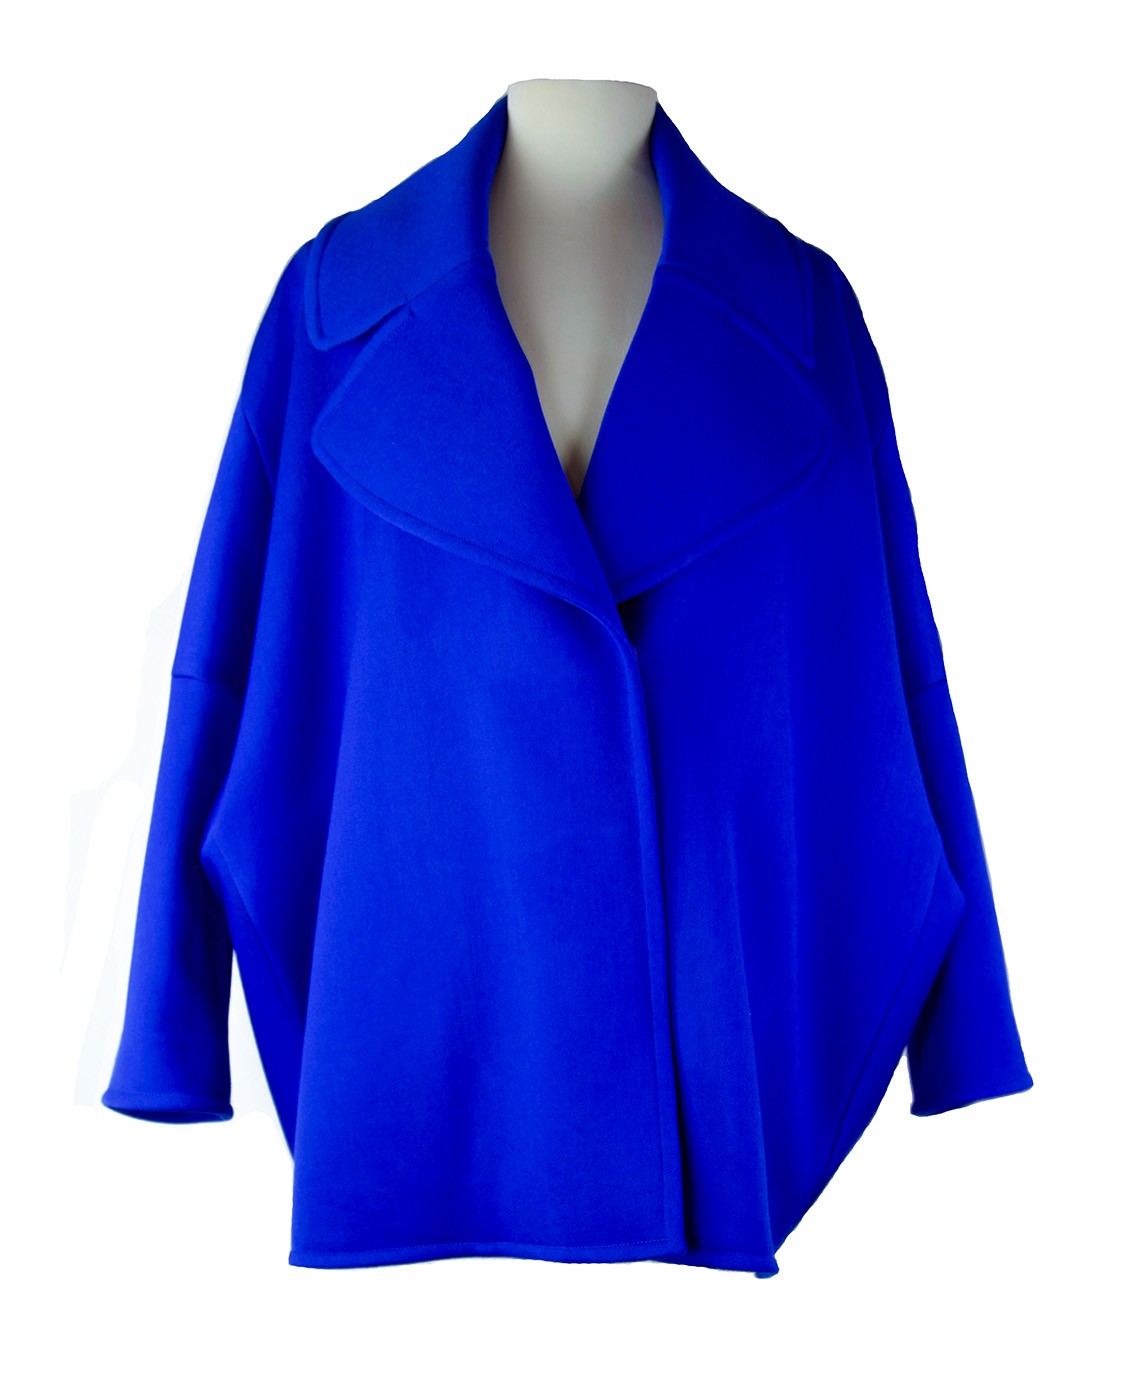 shop Marni Sales Cappotti: Marni wool-blend jacket lined with satin and finished with a collar in mazarine blue color. Shirt style collar, over-sized sleeves, concealed fastening on front with automatic buttons and pockets on side. Egg shape.

Composition: 92% wool, 6% polyamid, 2% elastan.
Lining: 100% silk..

Total length (size 40): 87 cm.
Chest (size 40): 170 cm.
Bottom width (size 40): 110 cm.
Sleeve length including shoulder (size 40): 80 cm
 number 799